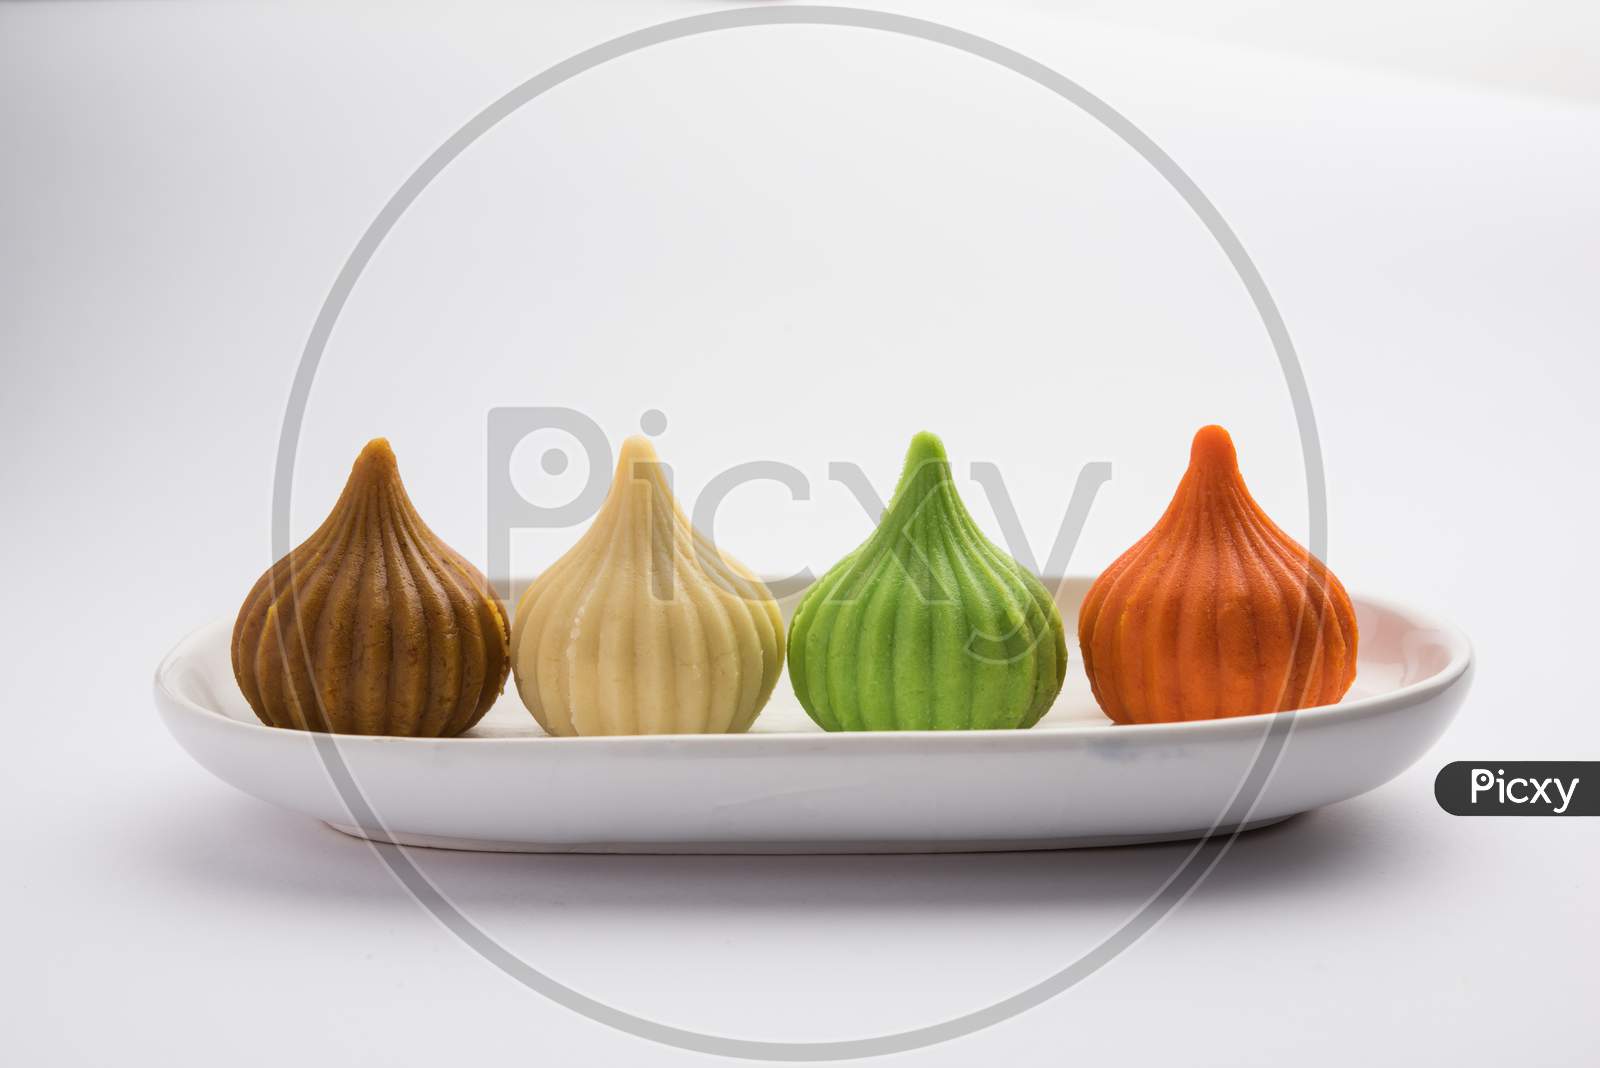 Modak Is An Indian Sweet Popular In States Of Maharashtra, Goa & In The Regions Of Konkan In India